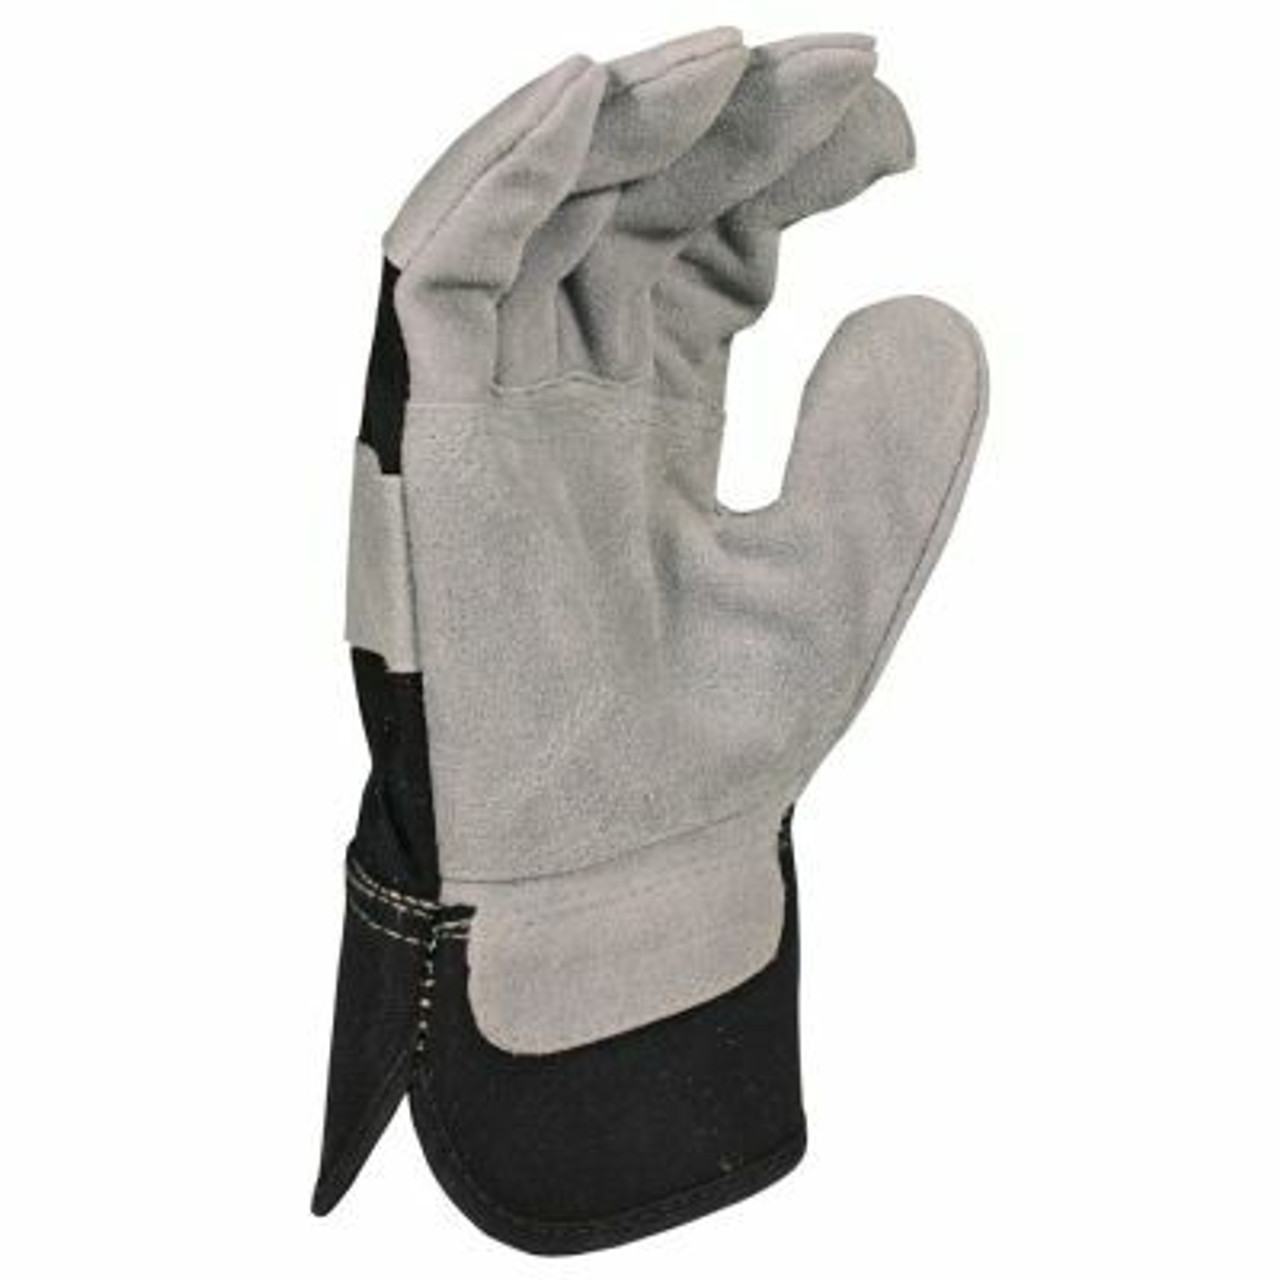 Revco 5B Standard Split Cowhide Leather Palm Work Gloves (Large)